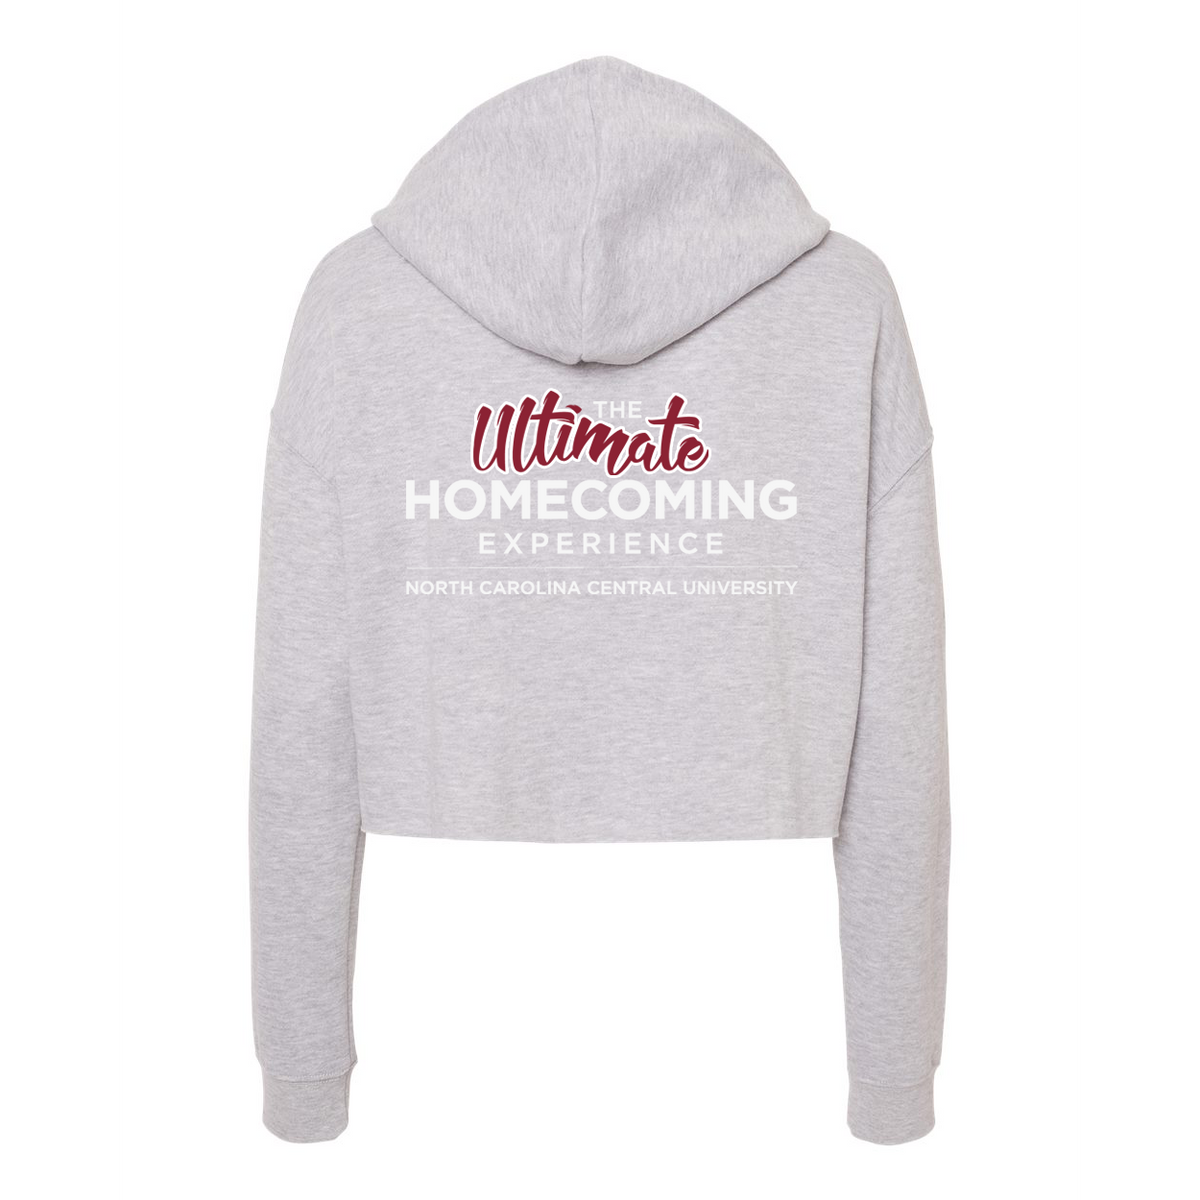 NC Central University Homecoming Independent Trading Co. Women’s Lightweight Cropped Hooded Sweatshirt